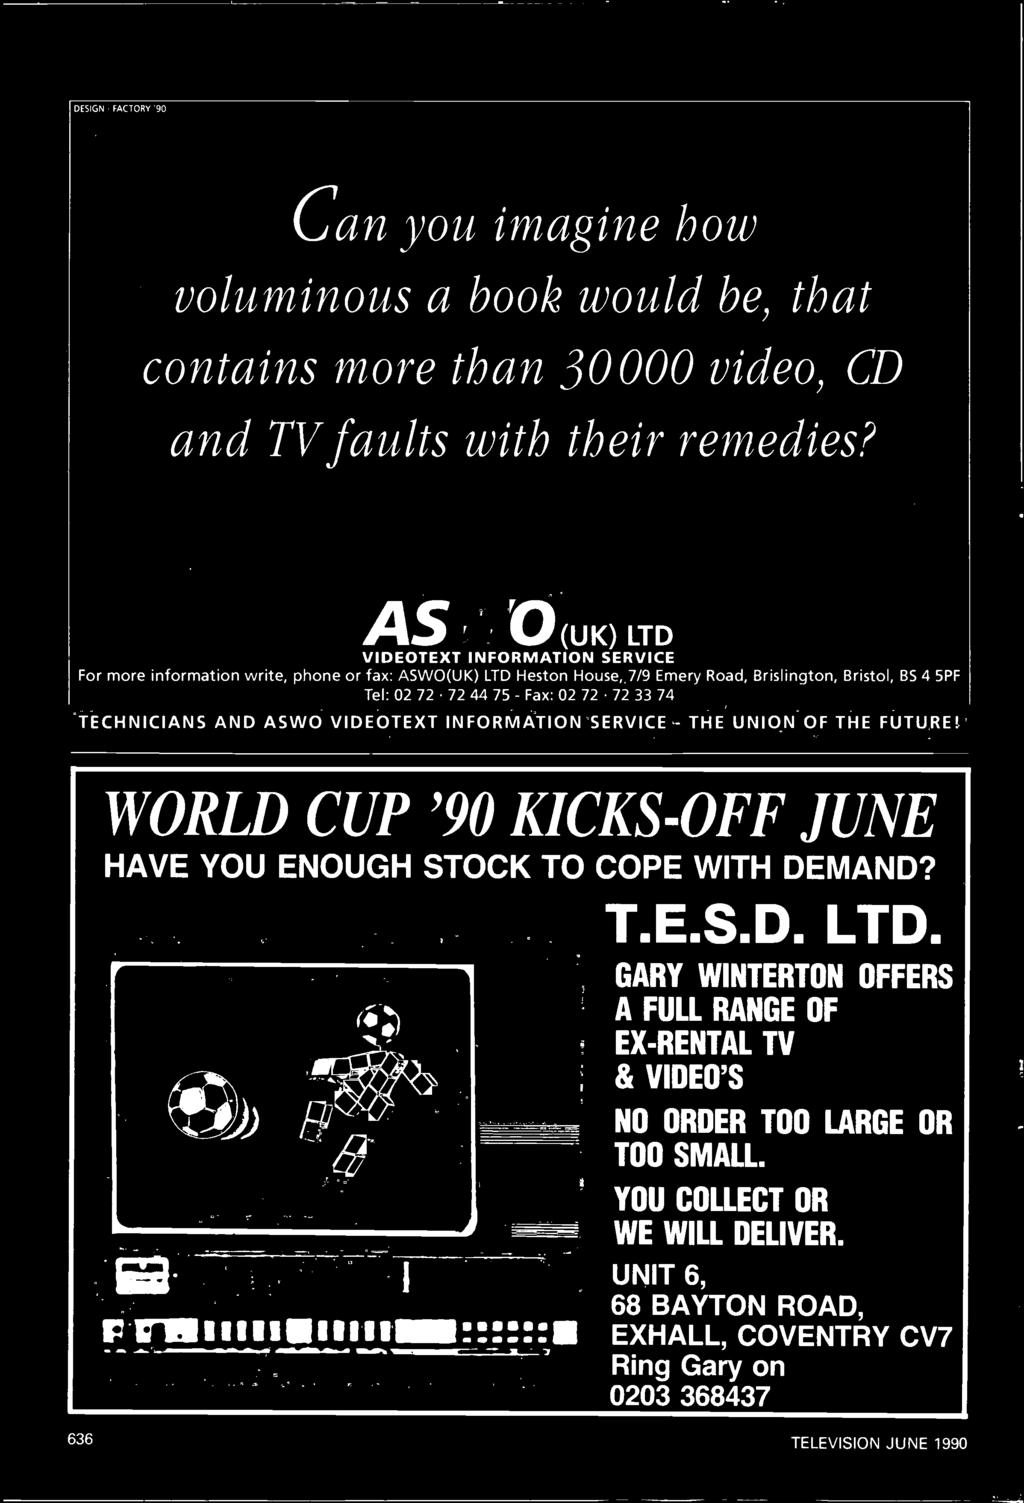 SERVICE - THE UNION OF THE FUTURE! WORLD CUP '90 KICKS -OFF JUNE HAVE YOU ENOUGH STOCK TO COPE WITH DEMAND? T.E.S.D. LTD.